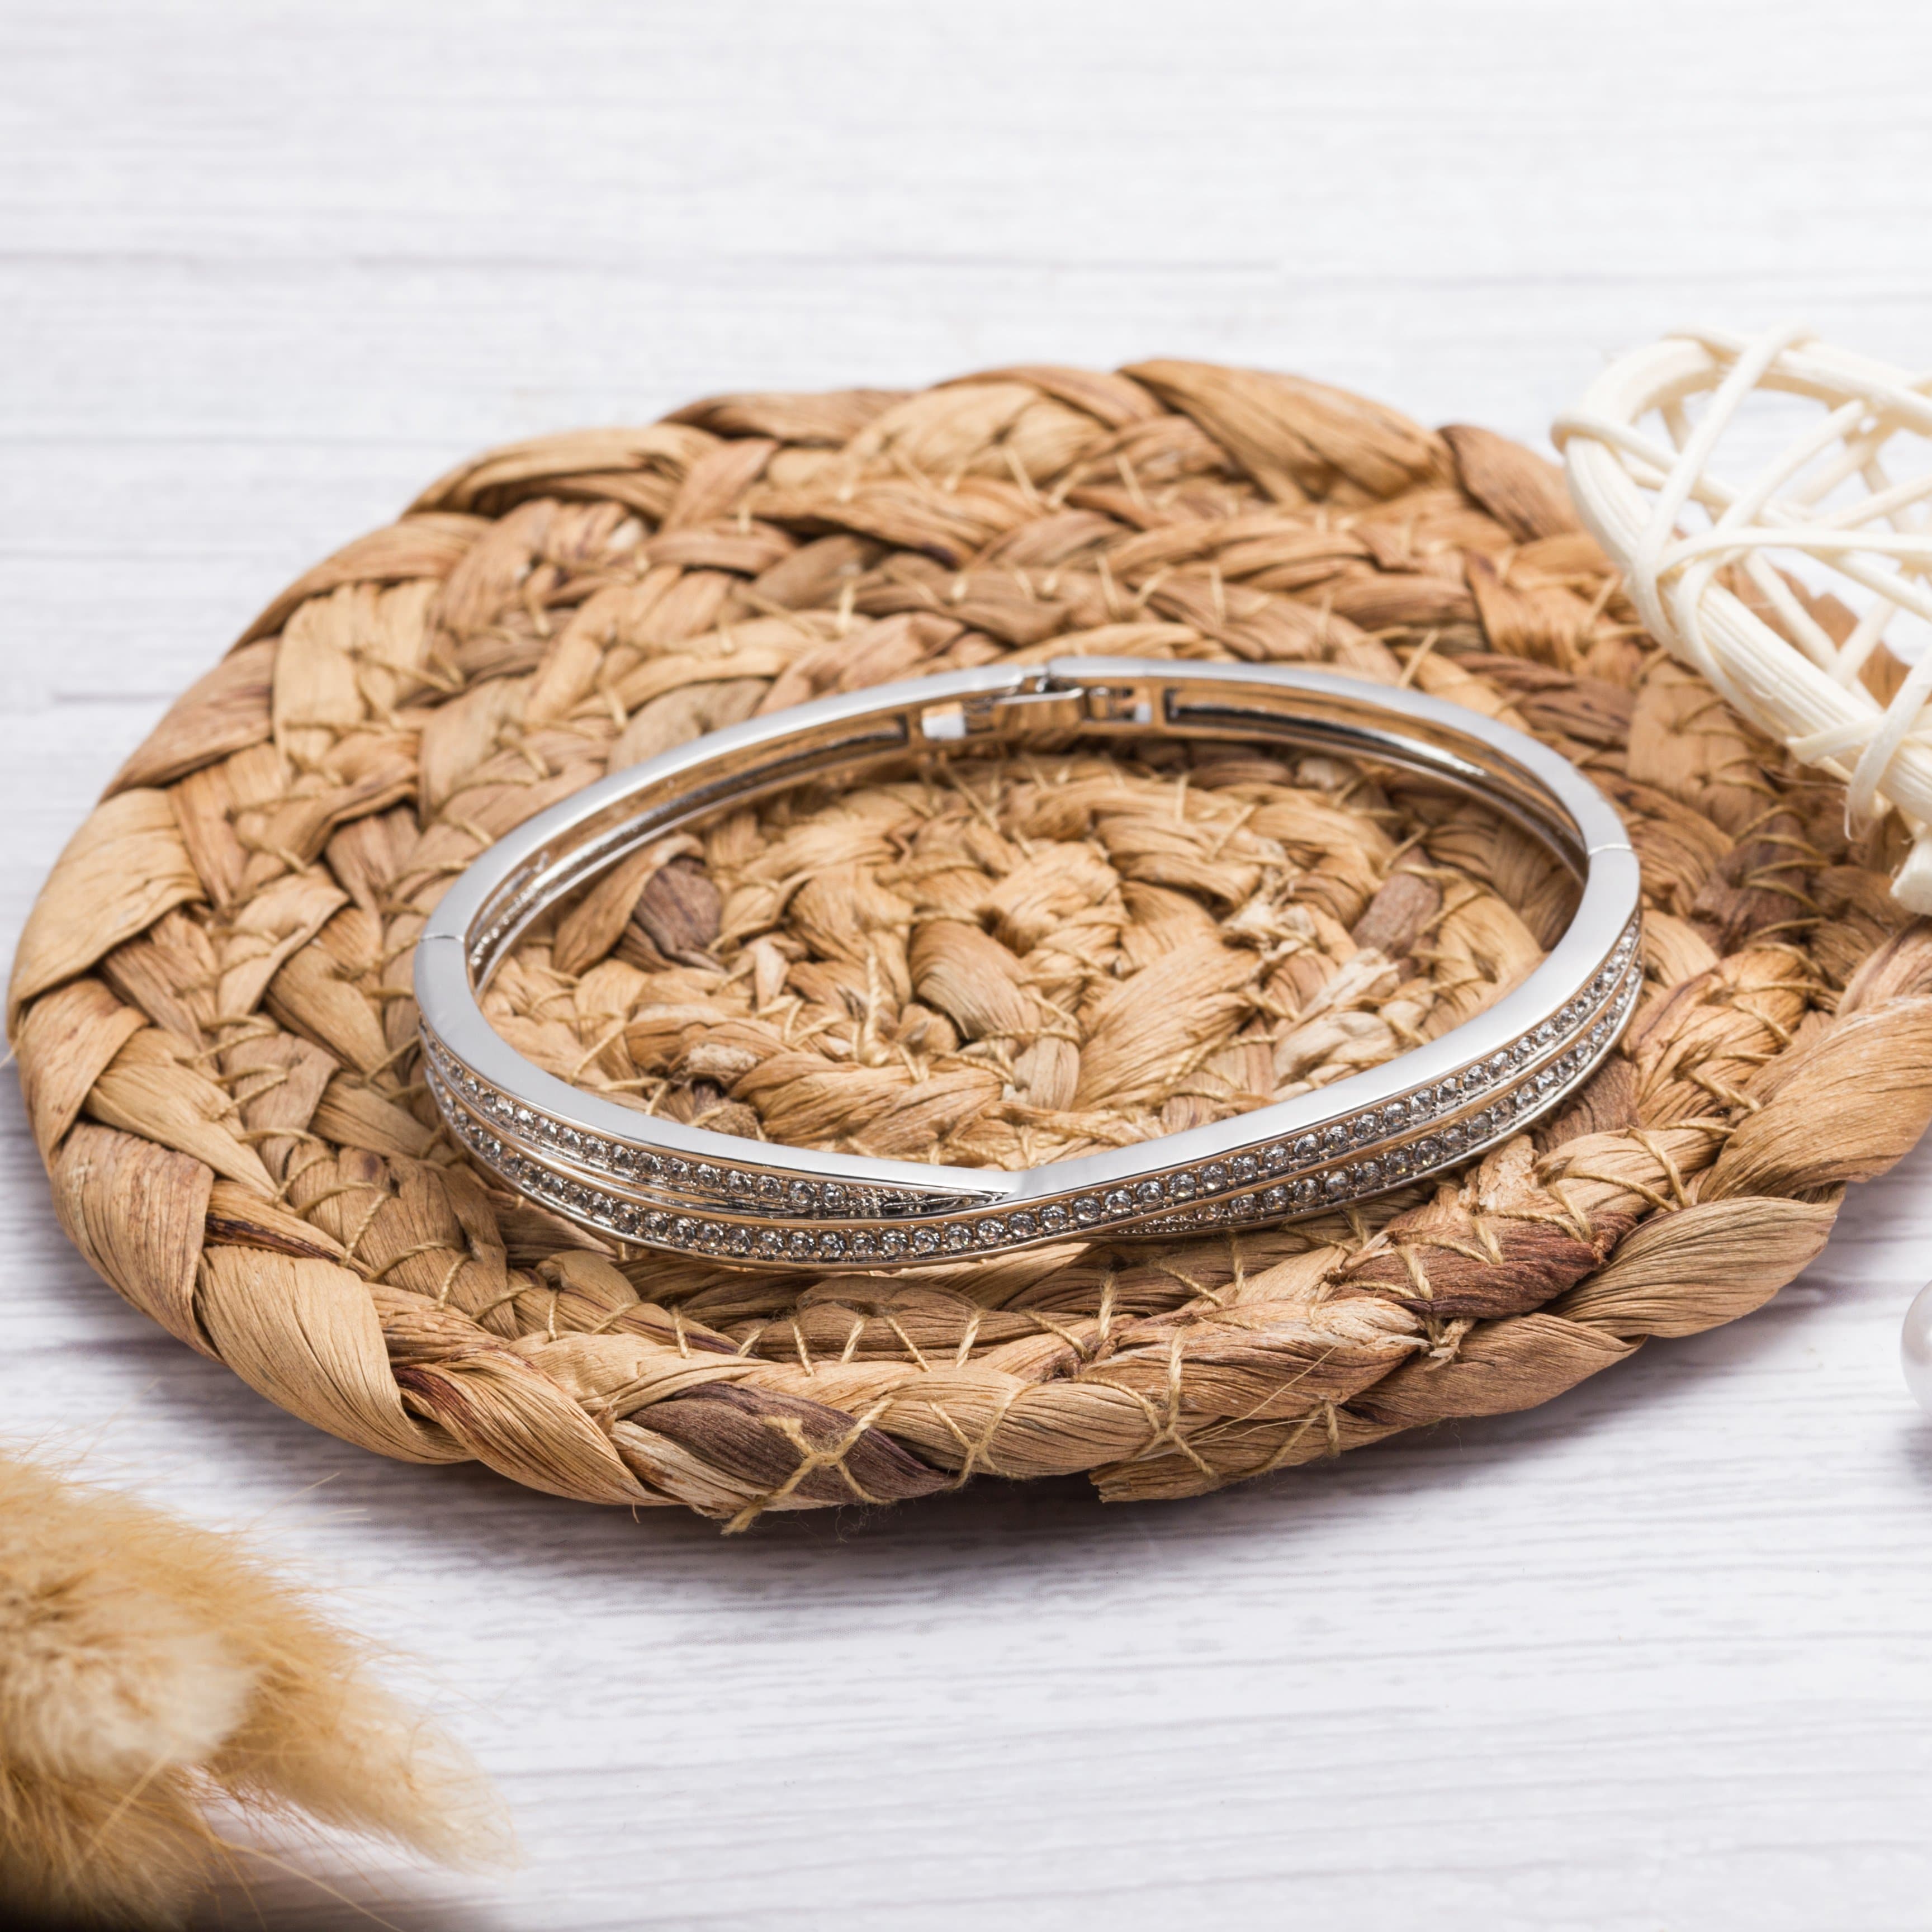 Silver Plated Crossover Bangle Created with Zircondia® Crystals